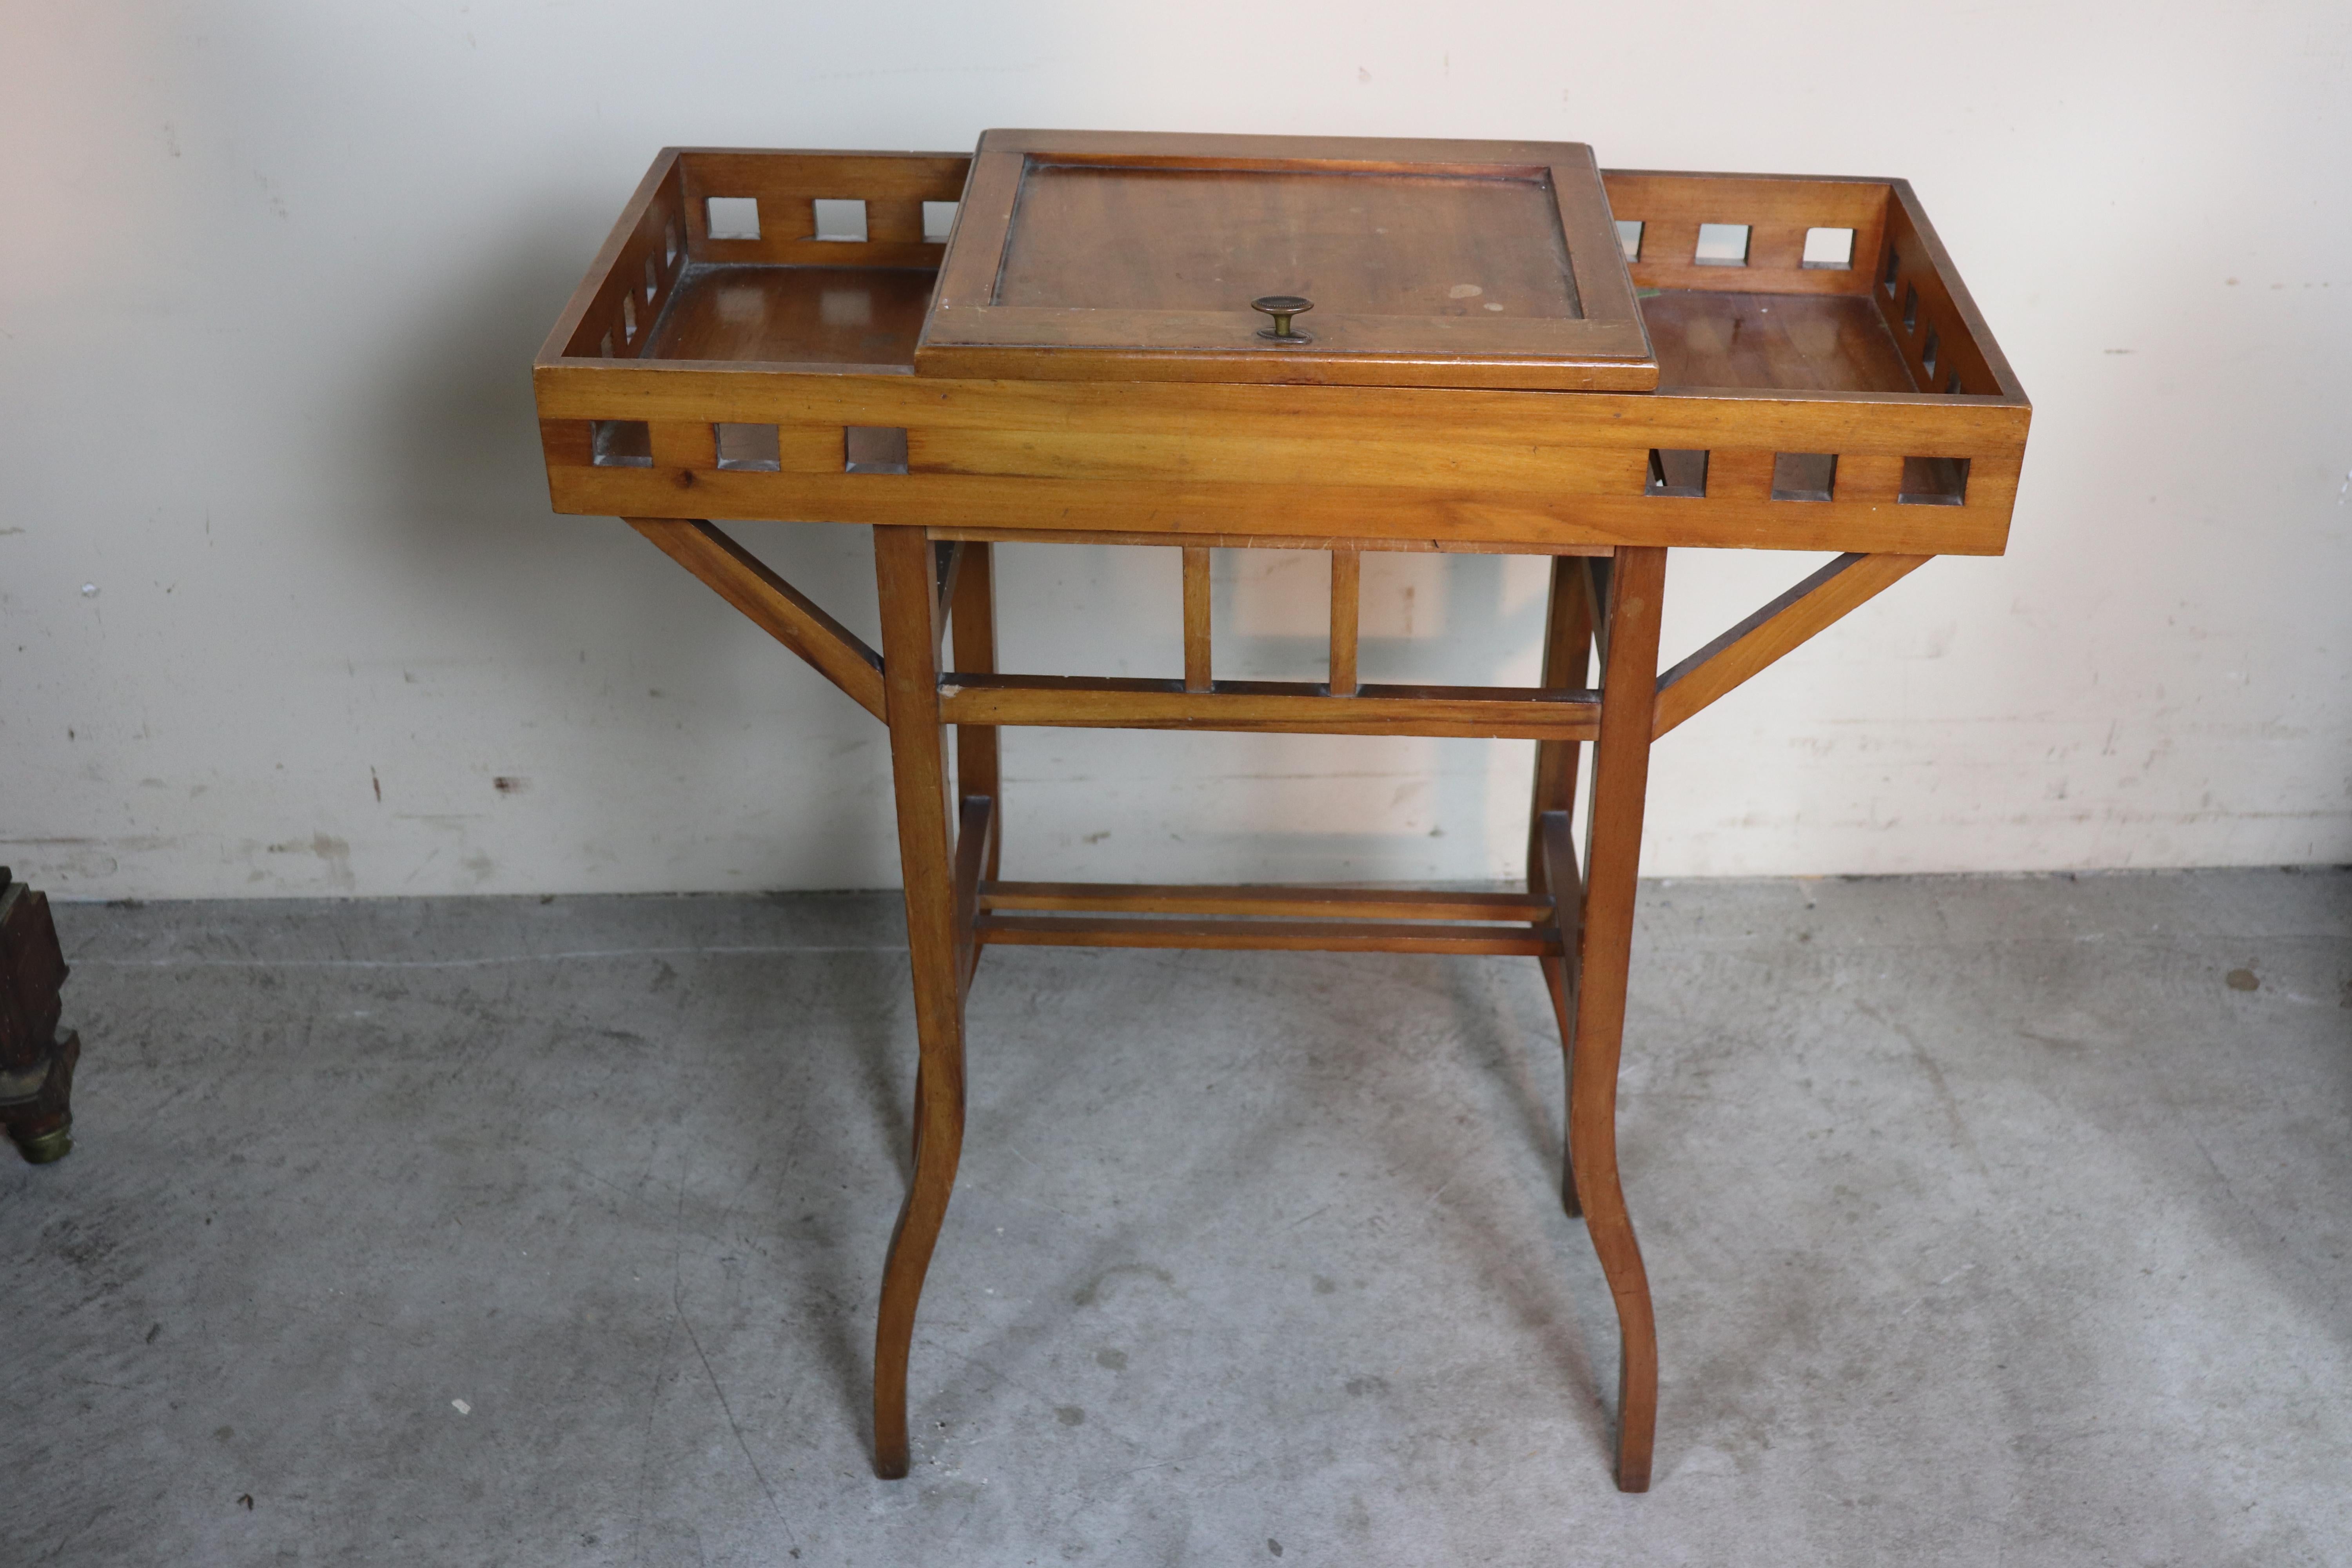 Beautiful important Italian Art Nouveau sewing table in cherrywood. these small tables were used by seamstresses who used the internal compartment to store their weaving tools.
The antique table used condition need of restoration as you can see